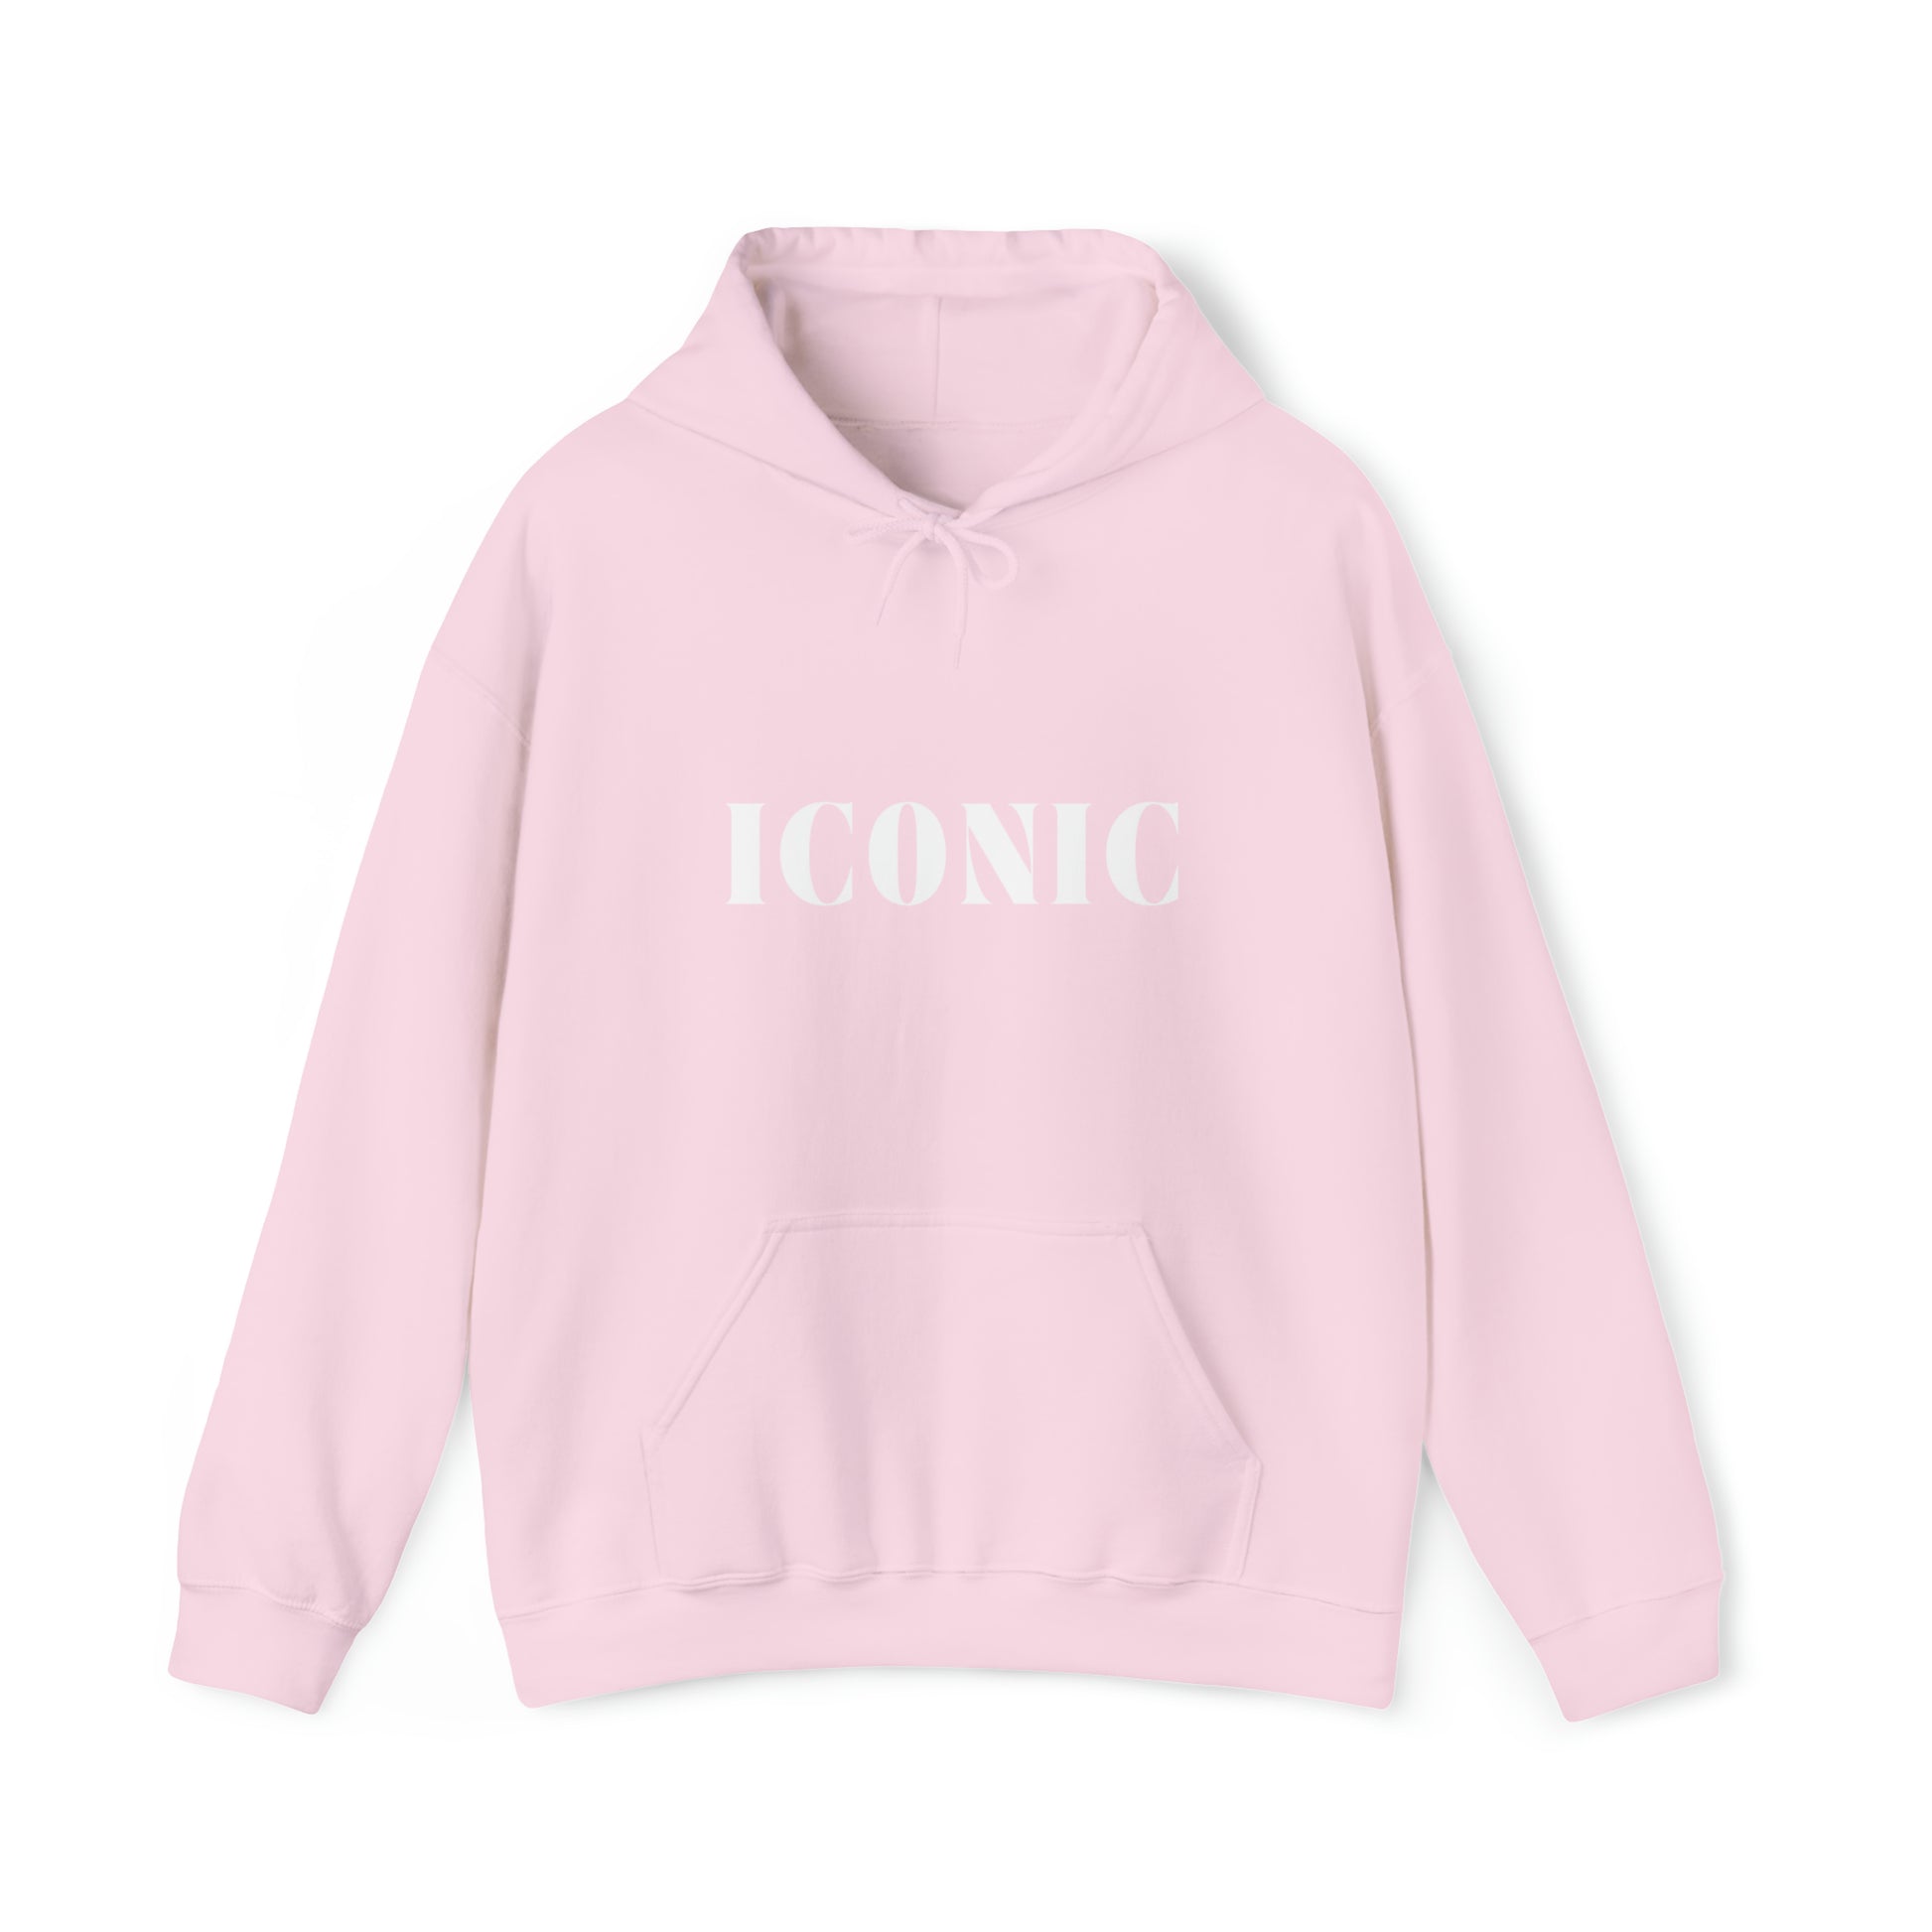 S Light Pink Iconic Hoodie from HoodySZN.com